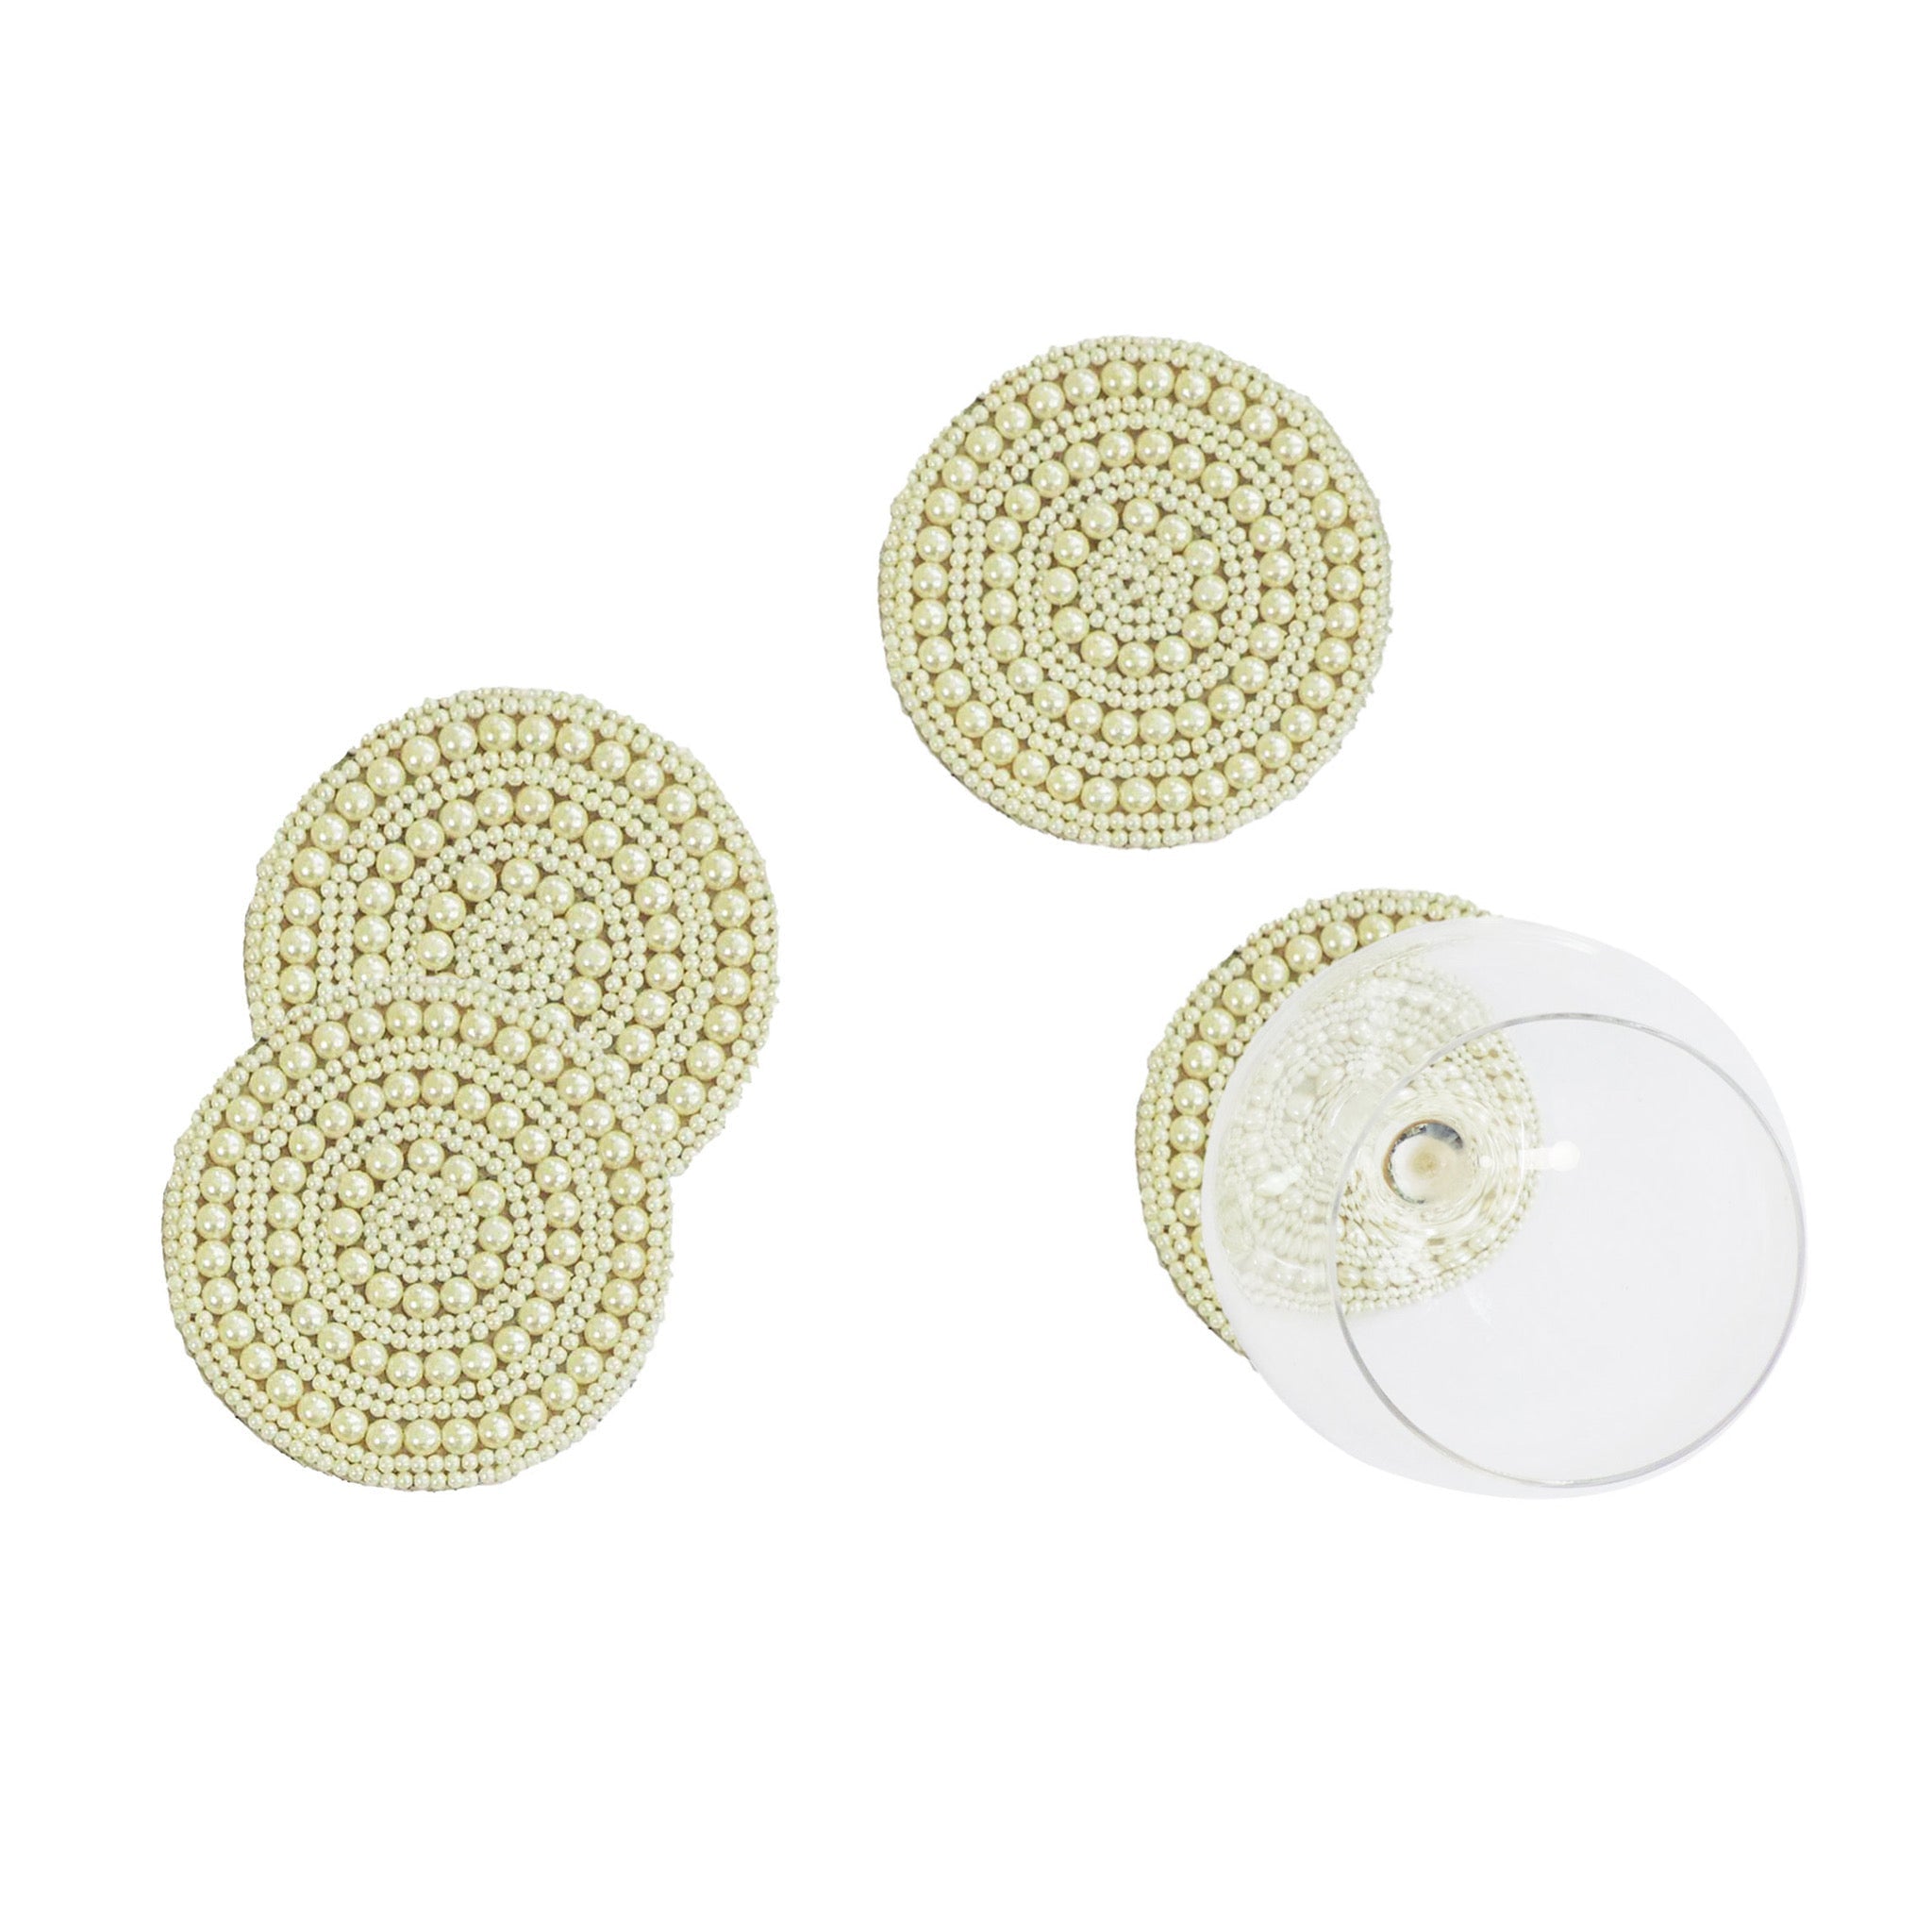 Whirl Bead Table Setting for 4 -  Embroidered Placemats, Coasters & Napkin Rings in Cream